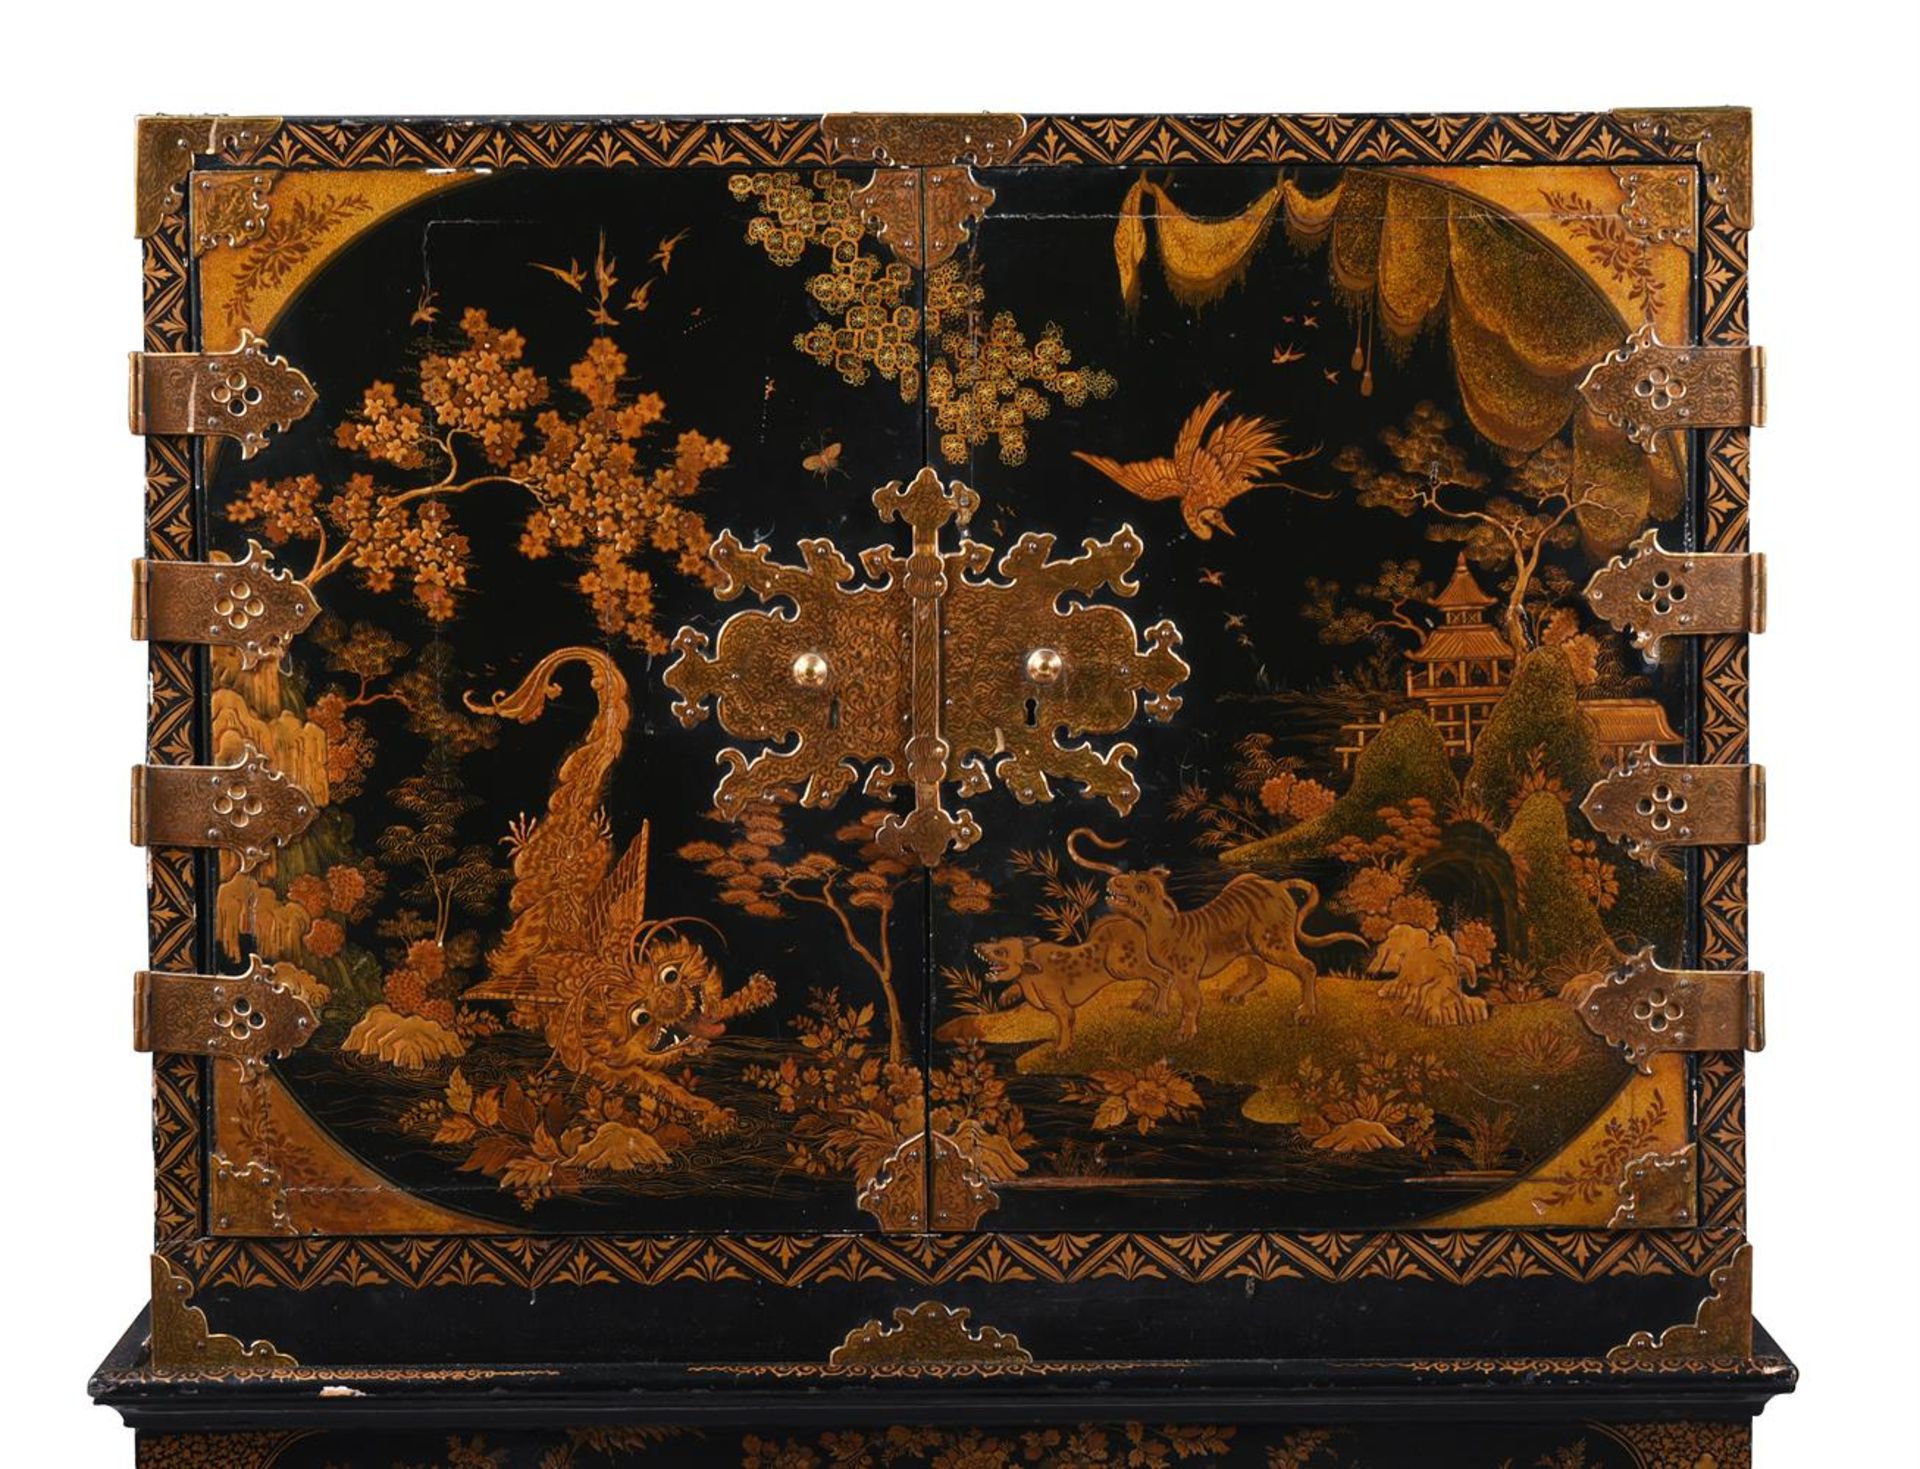 A BLACK LACQUER AND GILT CHINOISERIE DECORATED CABINET ON STAND, 18TH CENTURY - Image 3 of 7